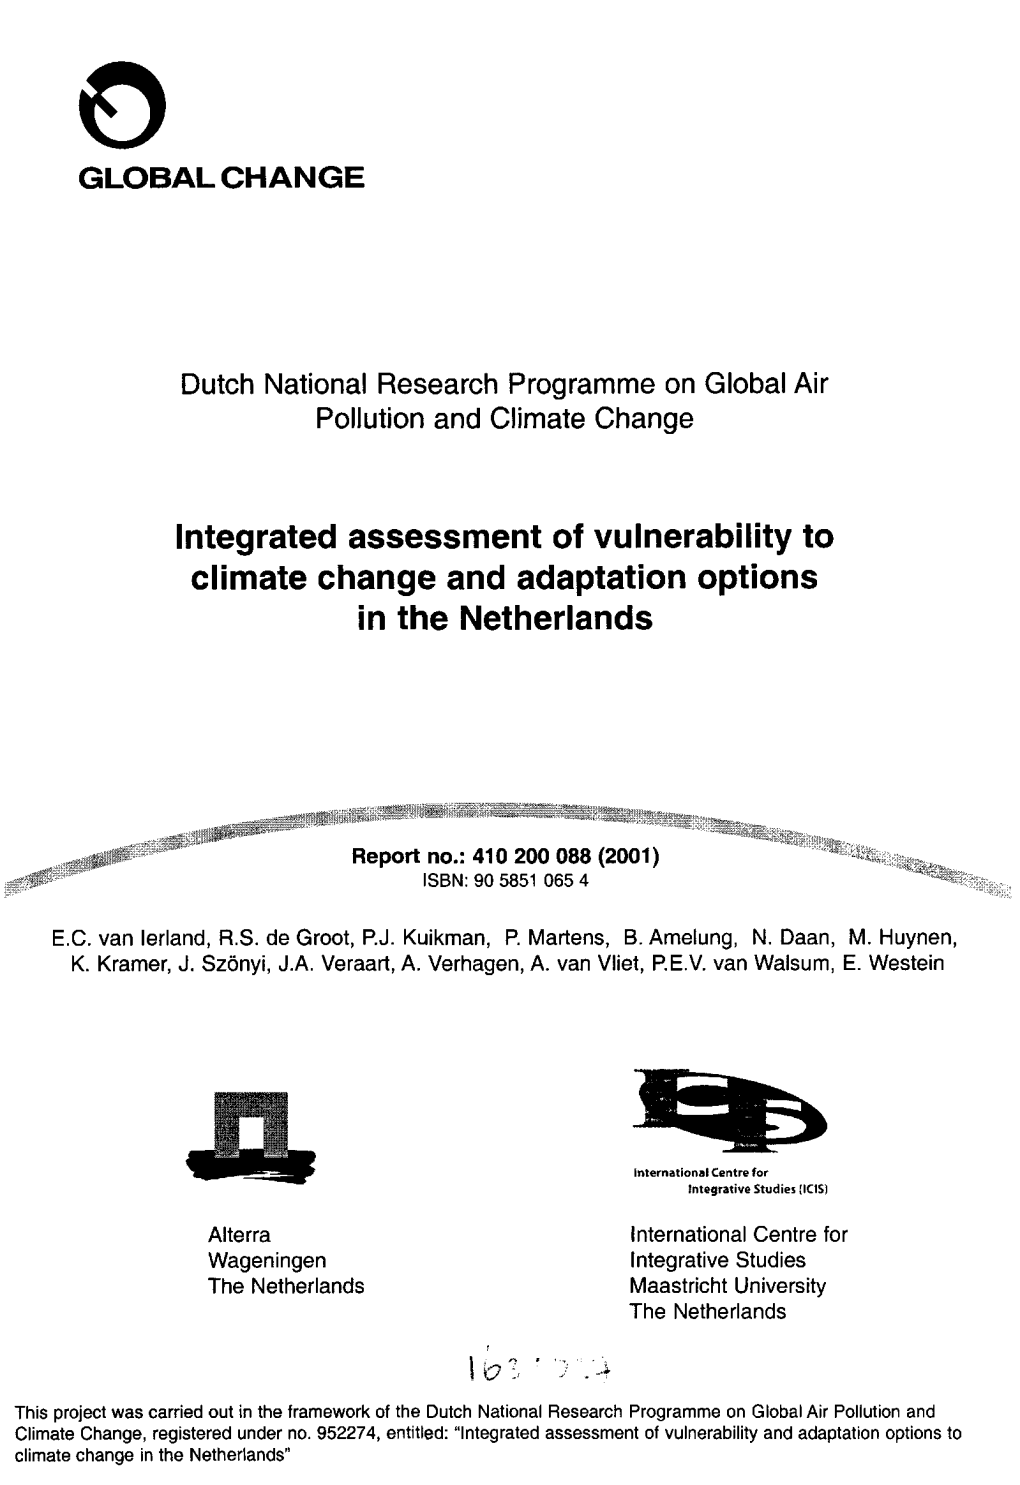 Integrated Assessment of Vulnerability to Climate Change and Adaptation Options in the Netherlands